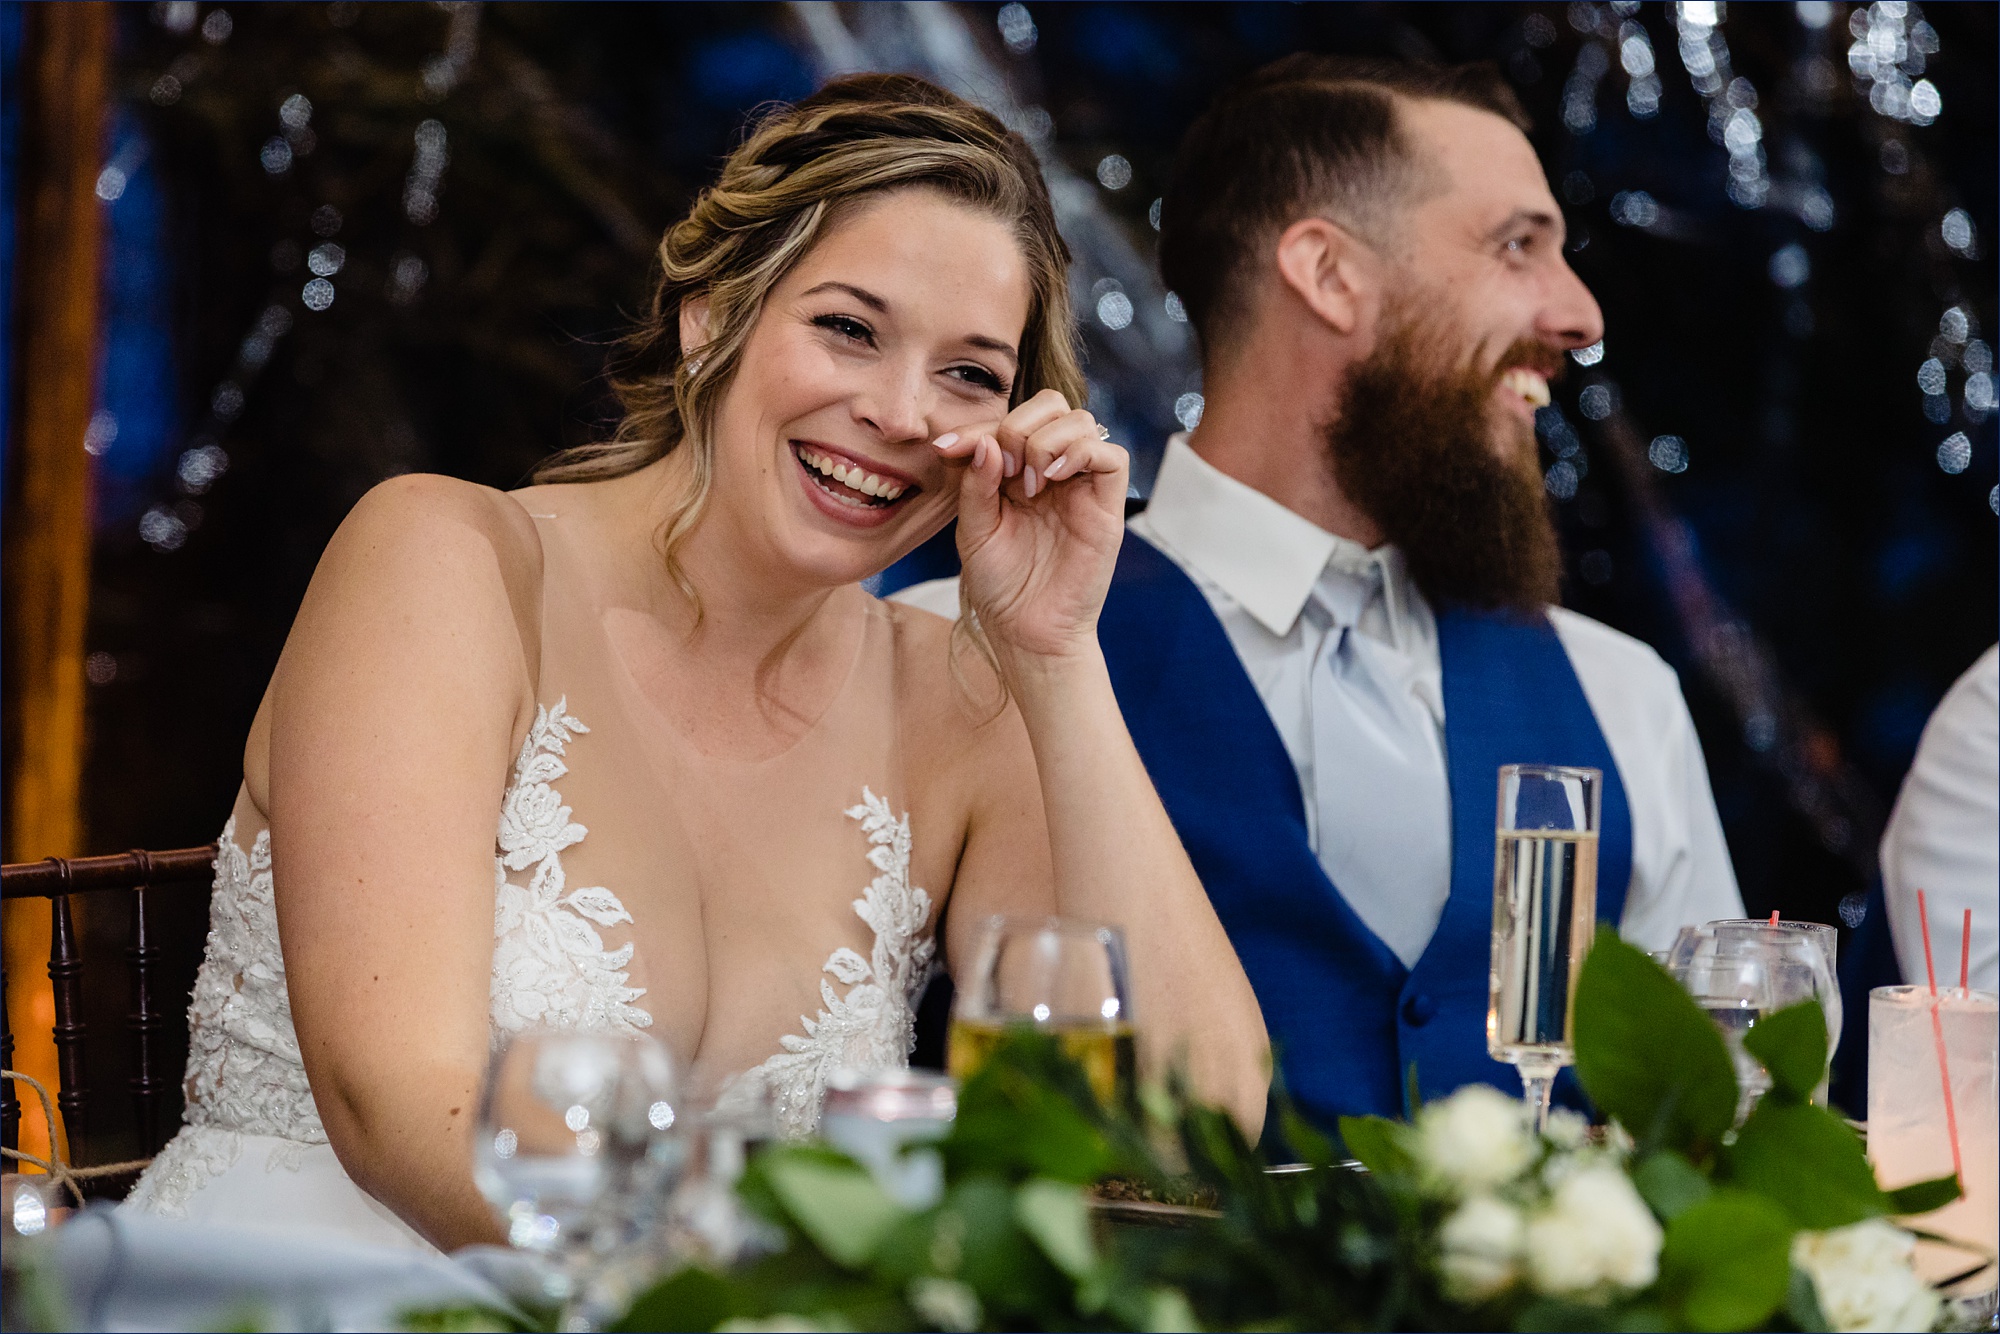 The newlyweds laugh at the toasts from friends on their wedding day